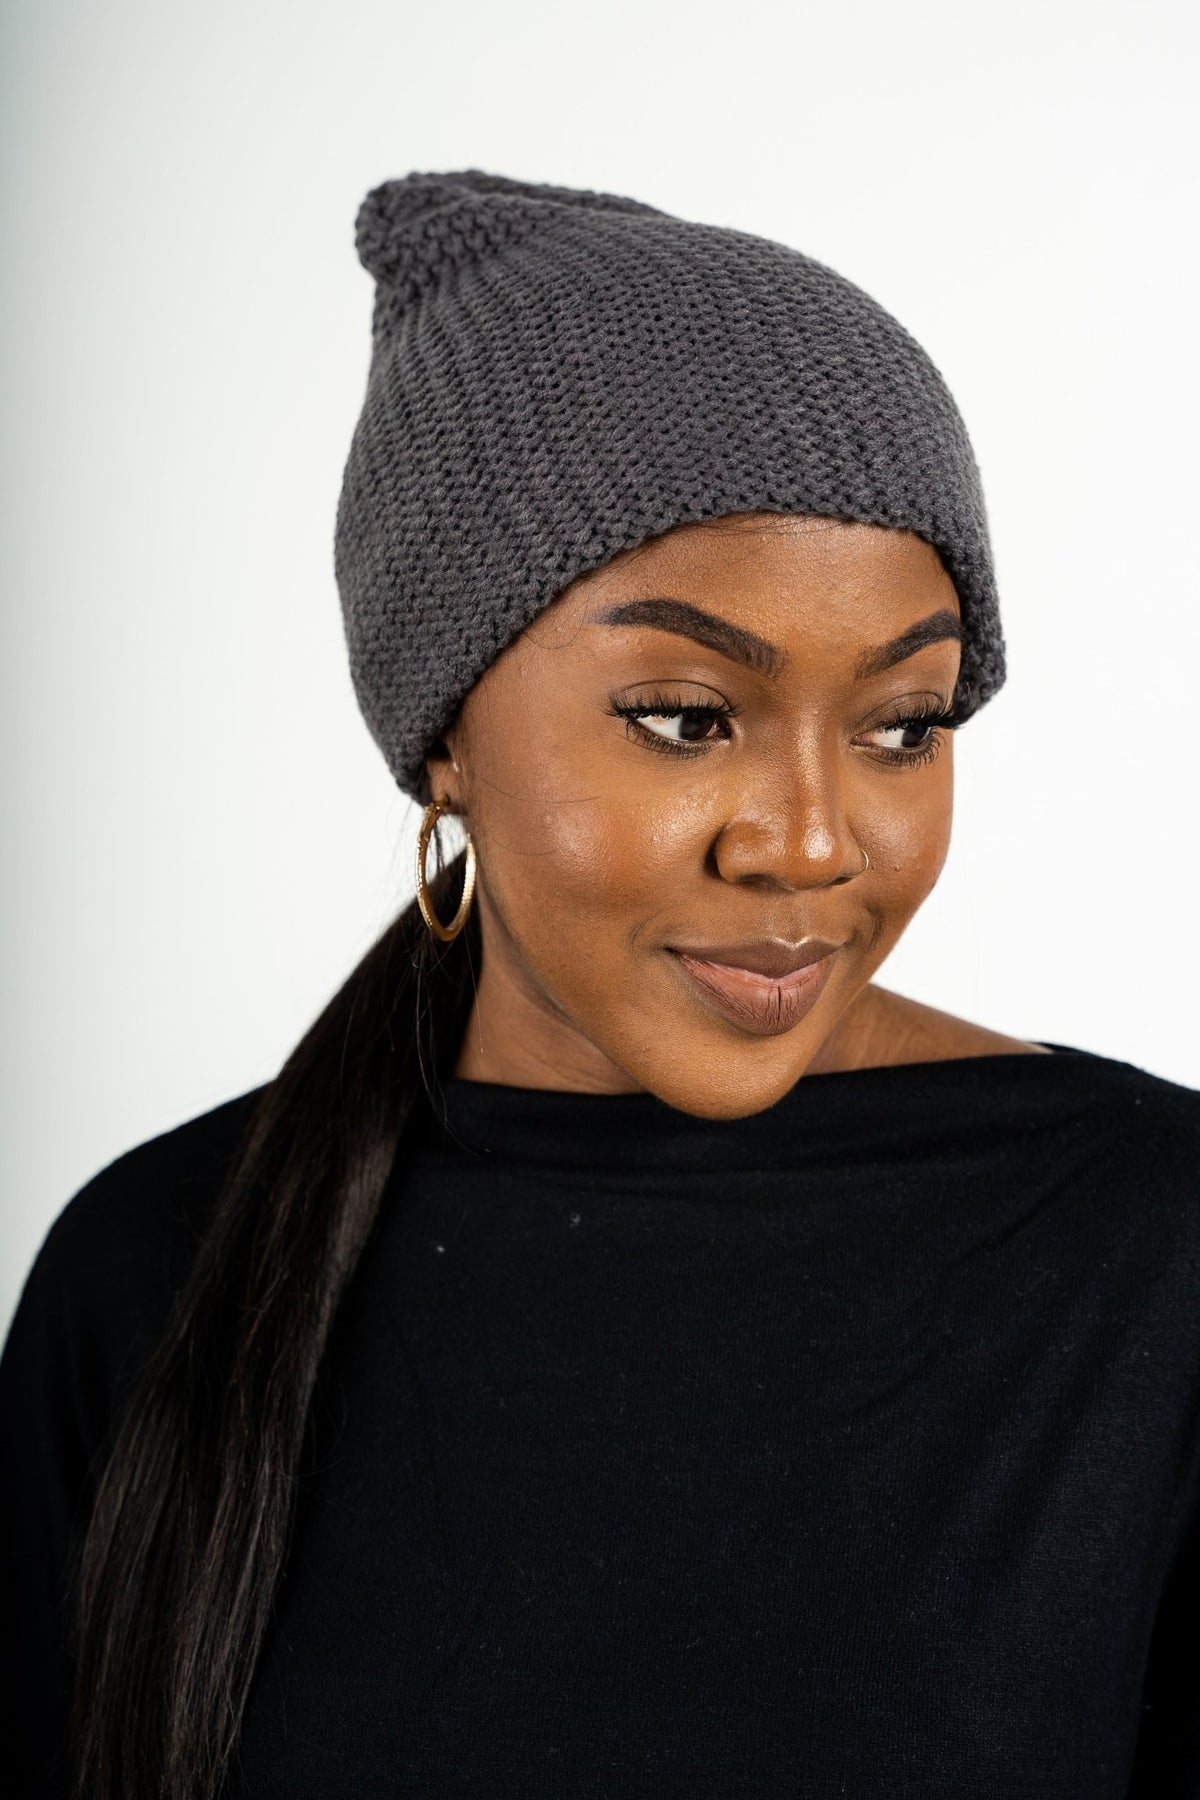 Textured slouchy beanie grey - Trendy Beanies at Lush Fashion Lounge Boutique in Oklahoma City